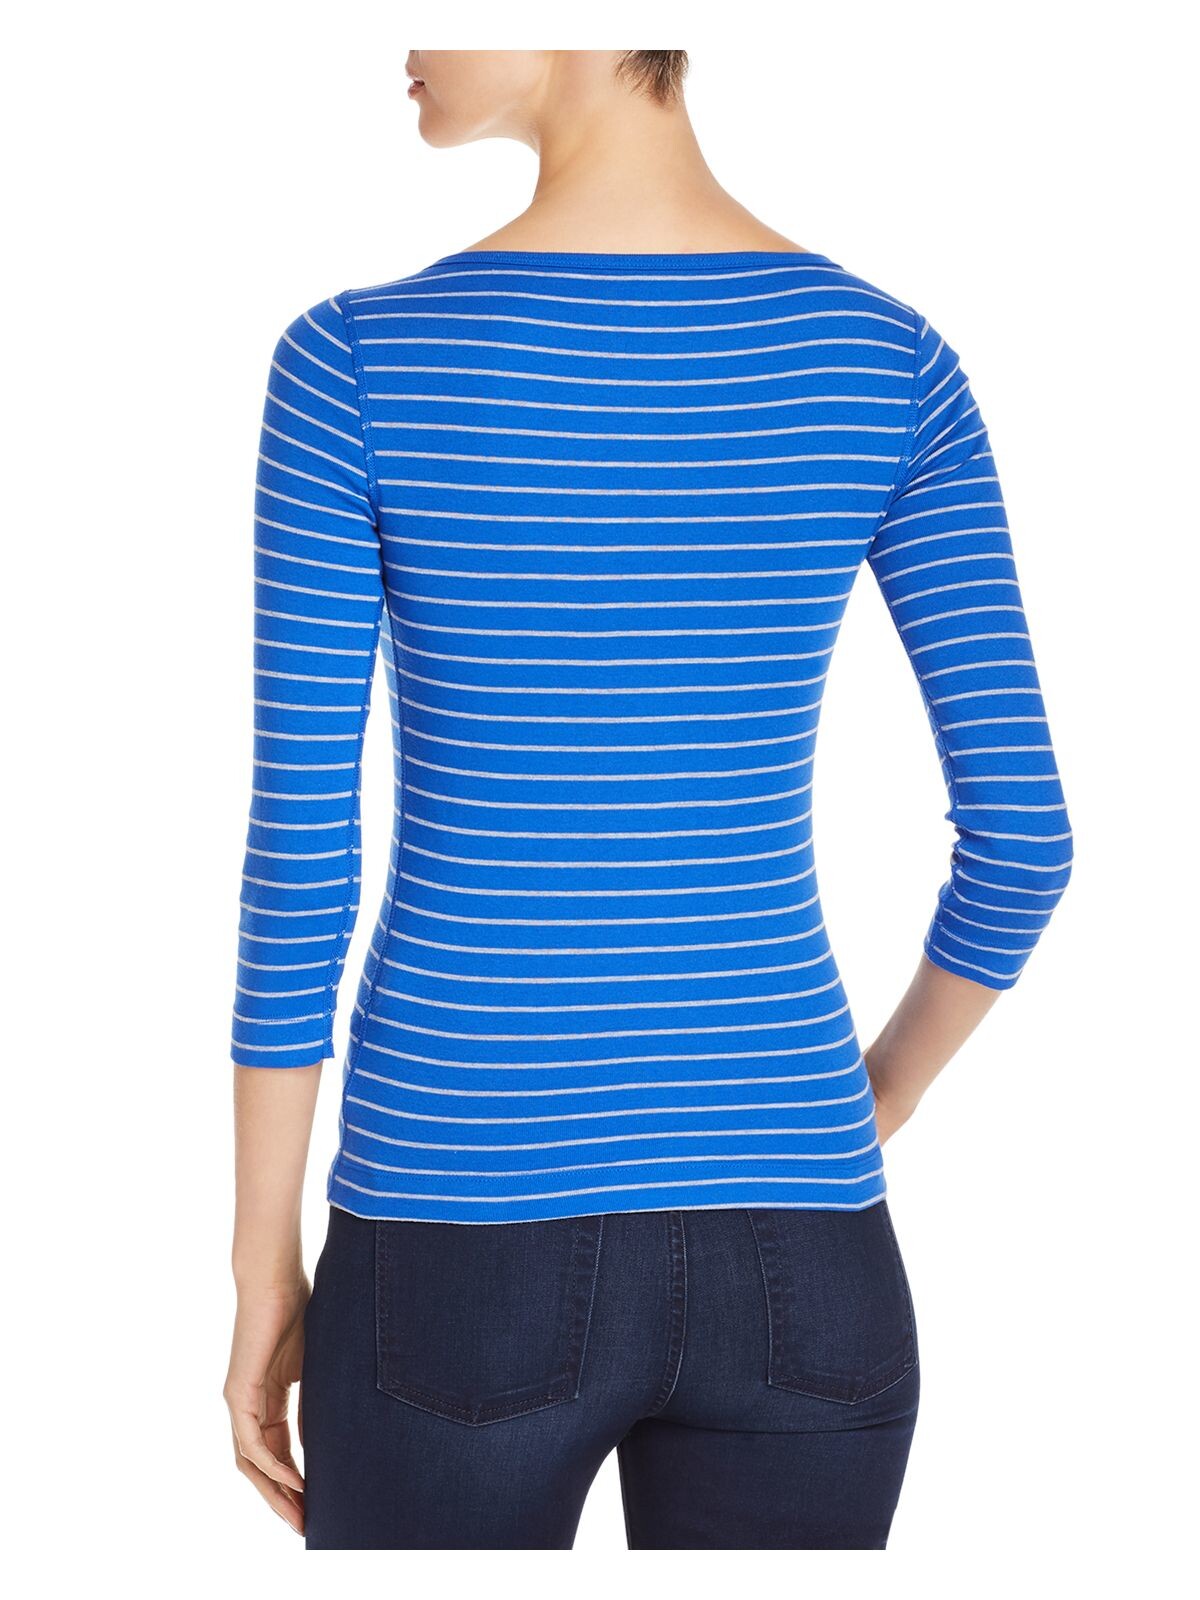 THREE DOTS Womens Blue Striped 3/4 Sleeve Boat Neck Top XS